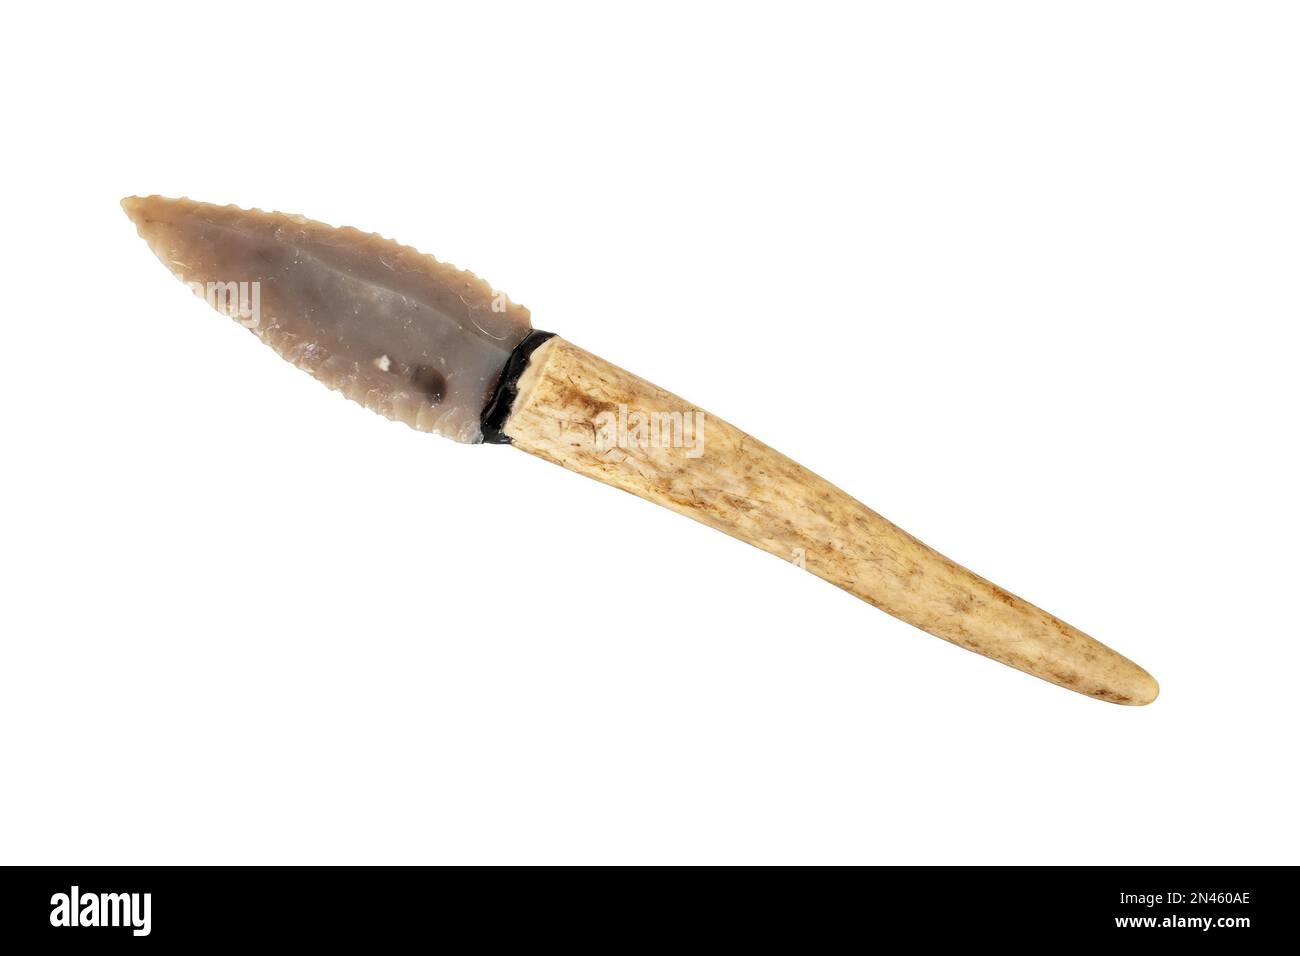 flint knife - stone age tool - leaf blade in deer antler isolated on white background Stock Photo